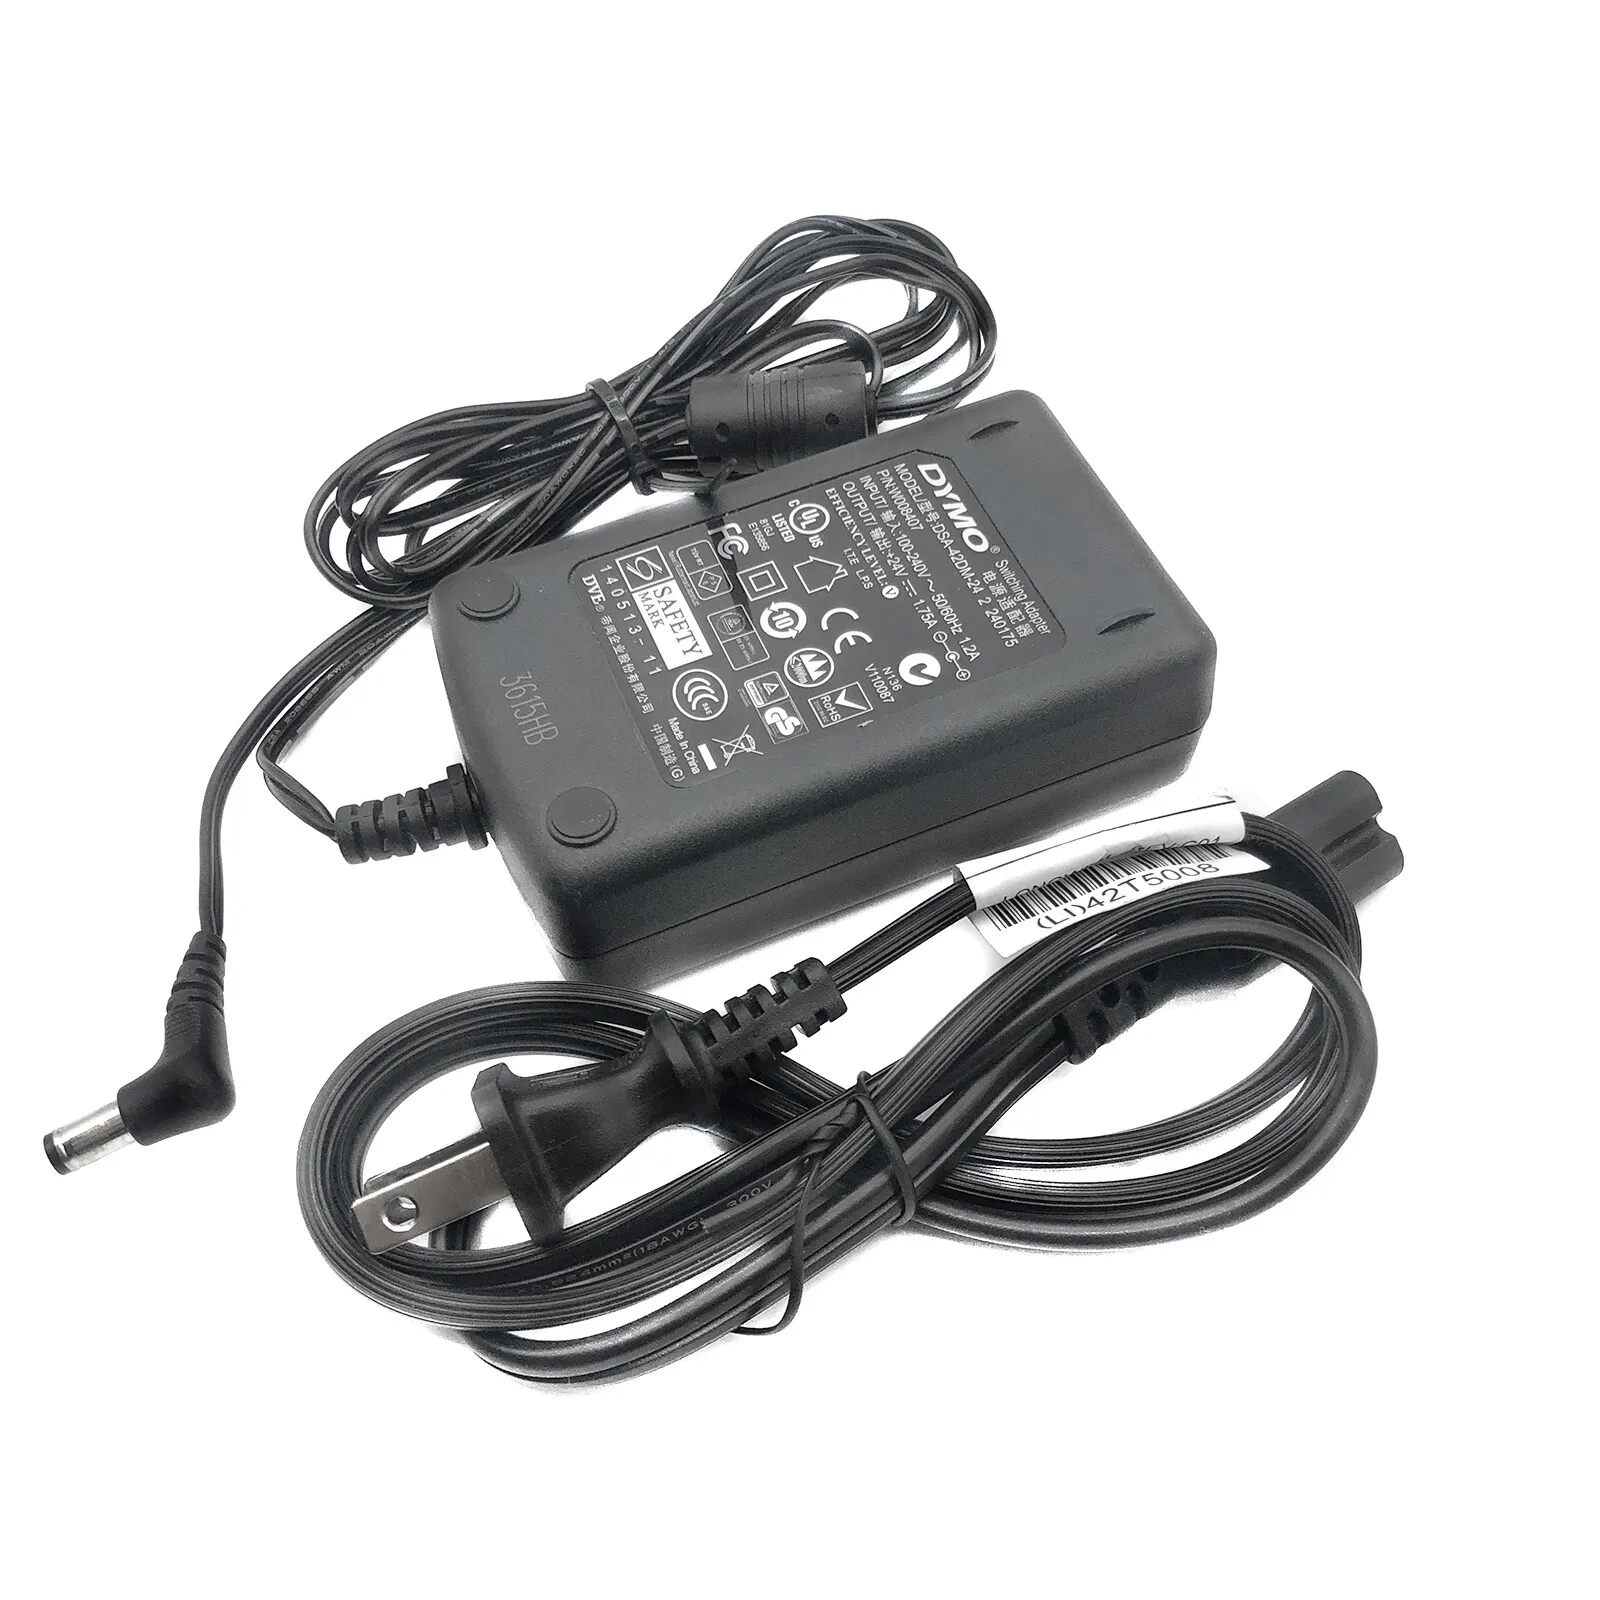 *Brand NEW*Genuine DYMO 24V 1.75A AC Adapter DSA-42DM-24 2 240175 for LabelWriter Label Printer 400 Twin Turbo - Click Image to Close